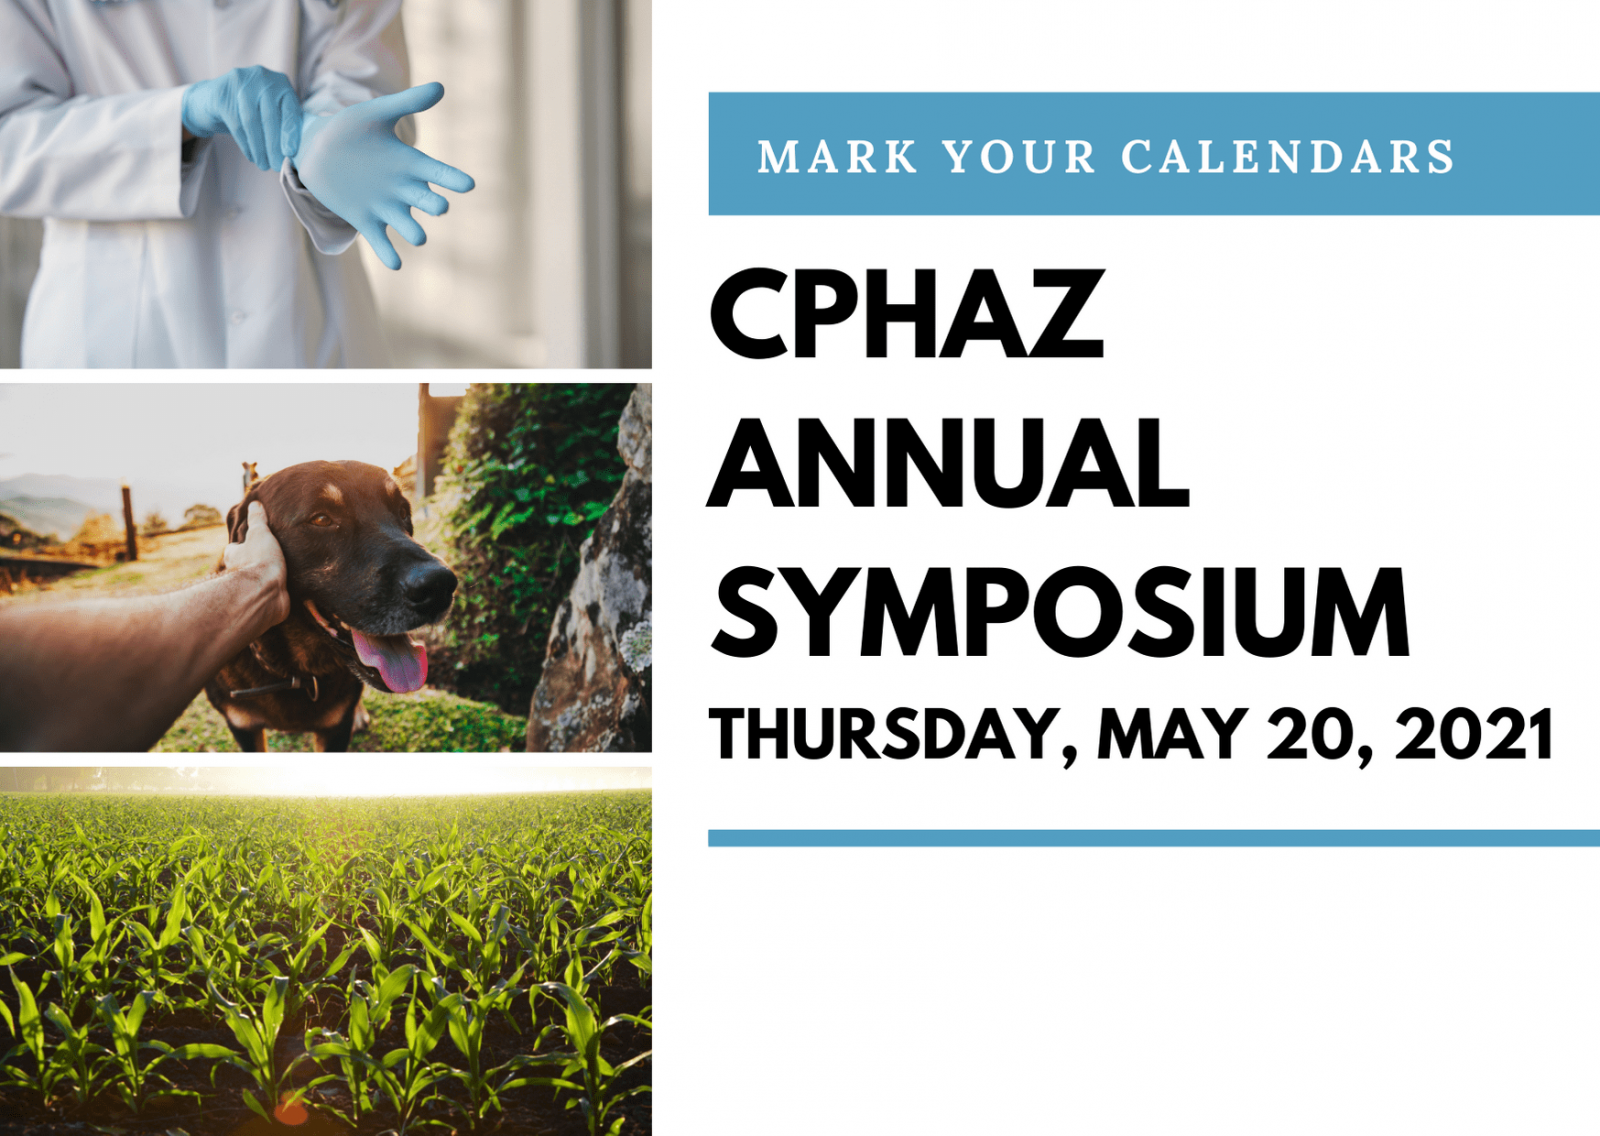 The Centre for Public Health and Zoonoses symposium will highlight research across the public health and zoonotic disease spectrum.